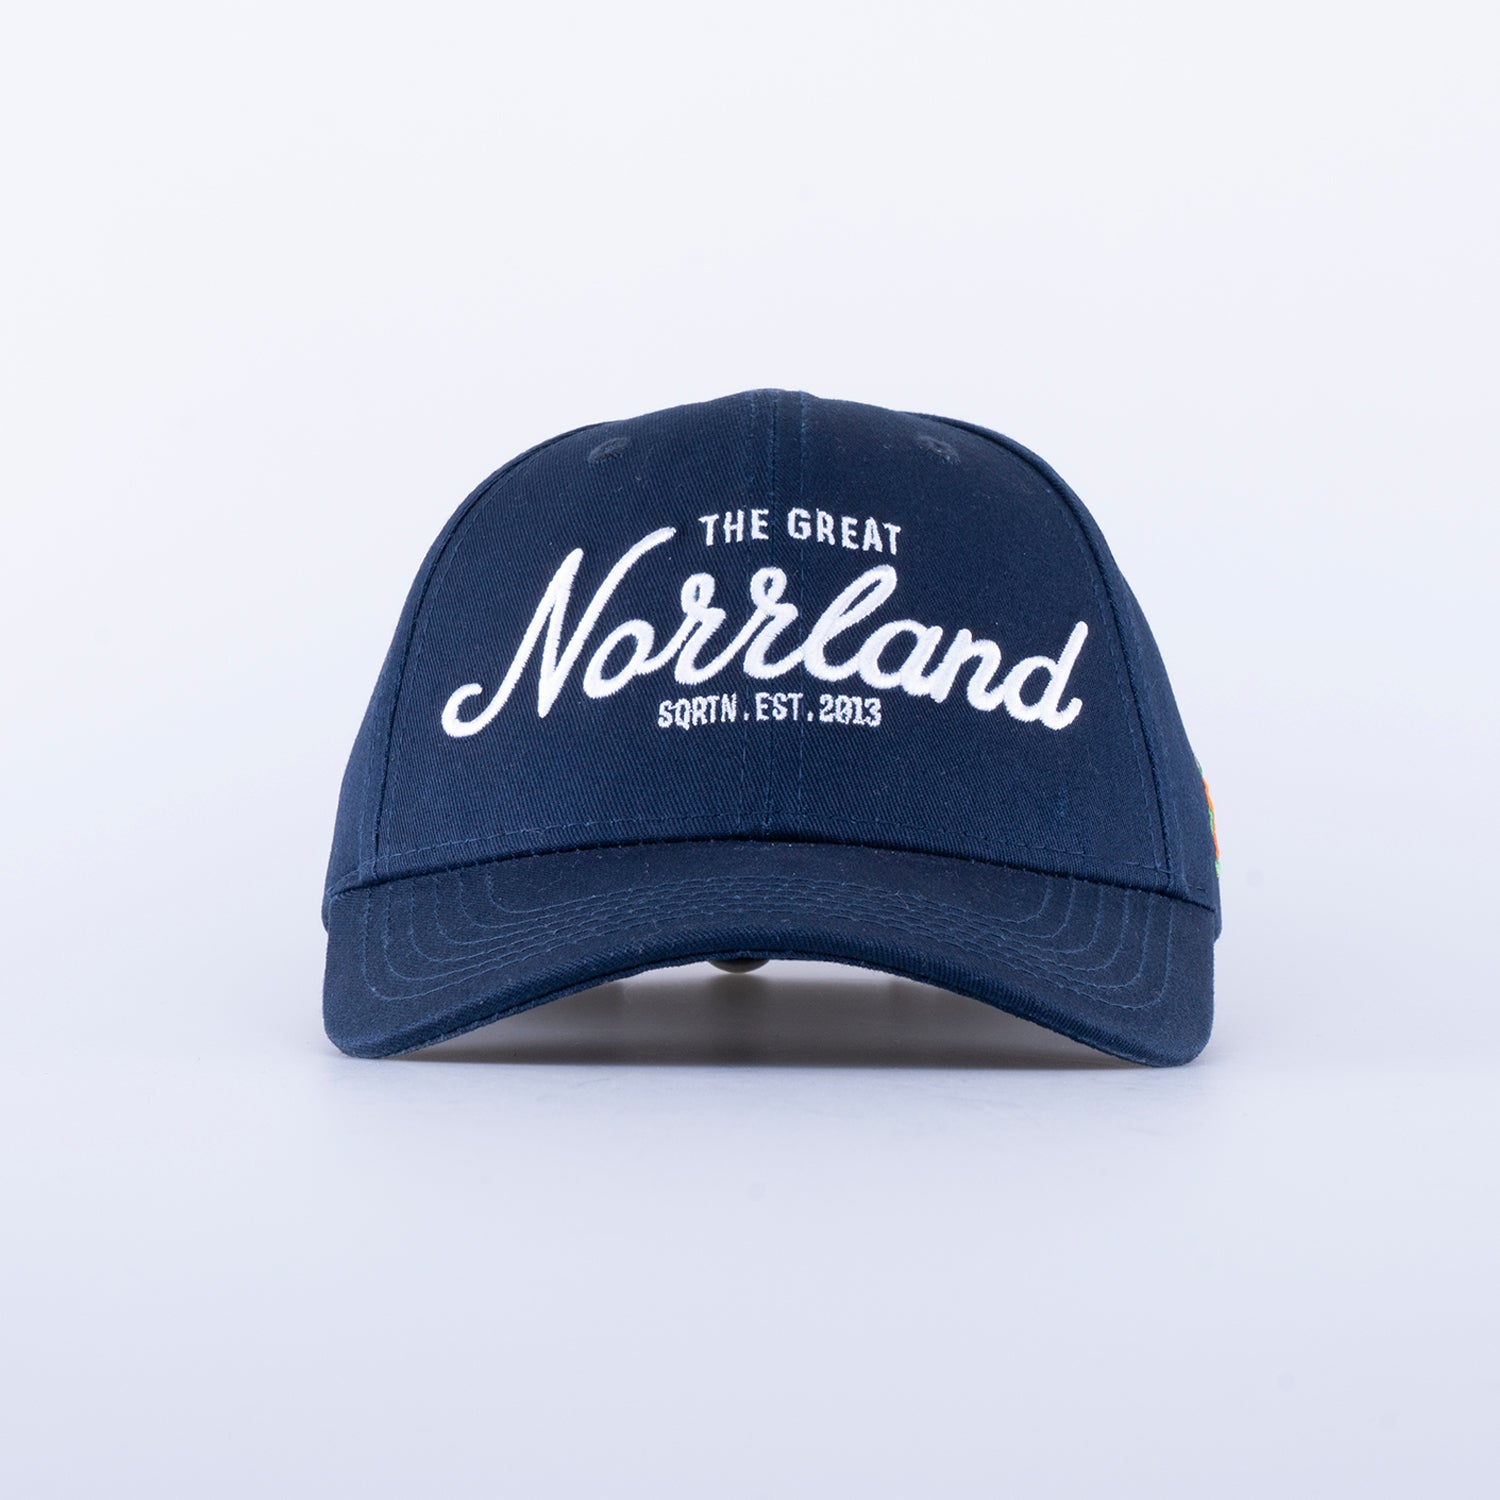 GREAT NORRLAND KEPS - HOOKED NAVY